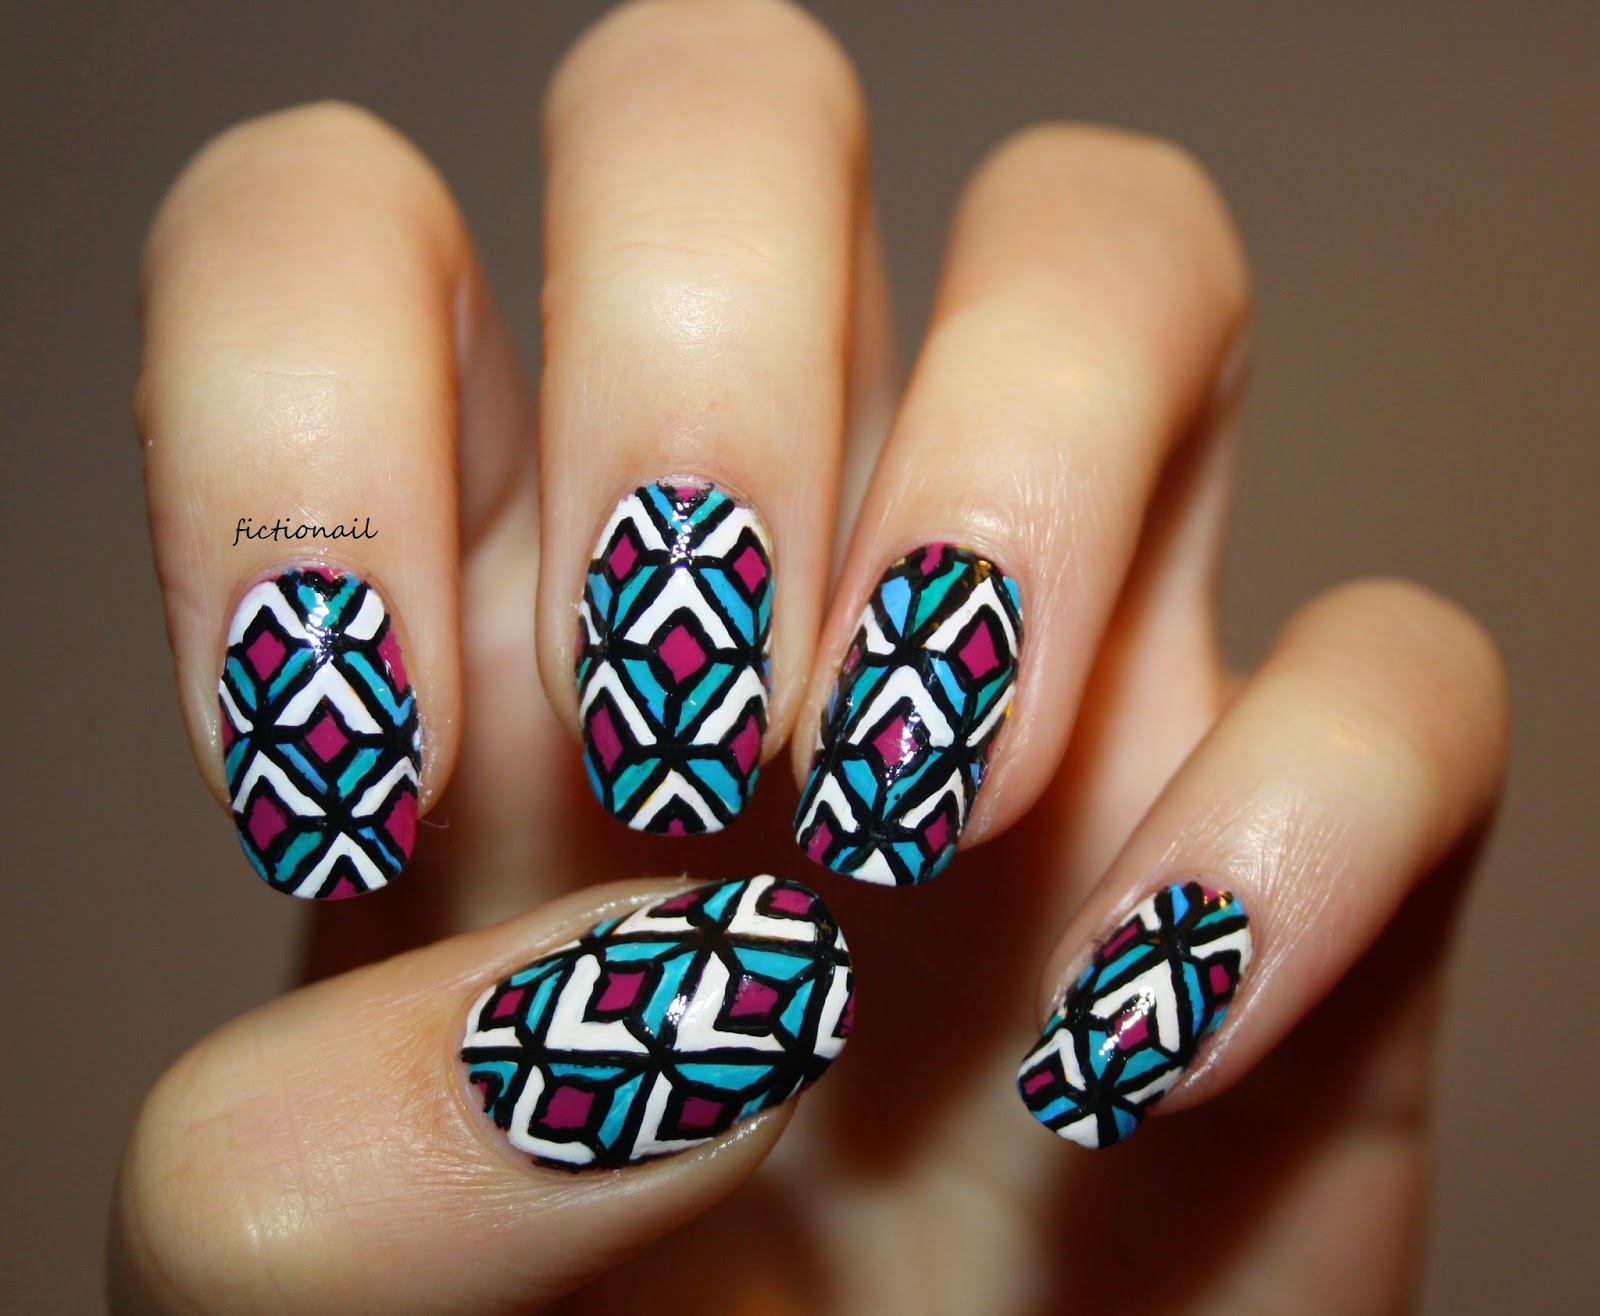 10. Short Rounded Acrylic Nails with Geometric Patterns - wide 7